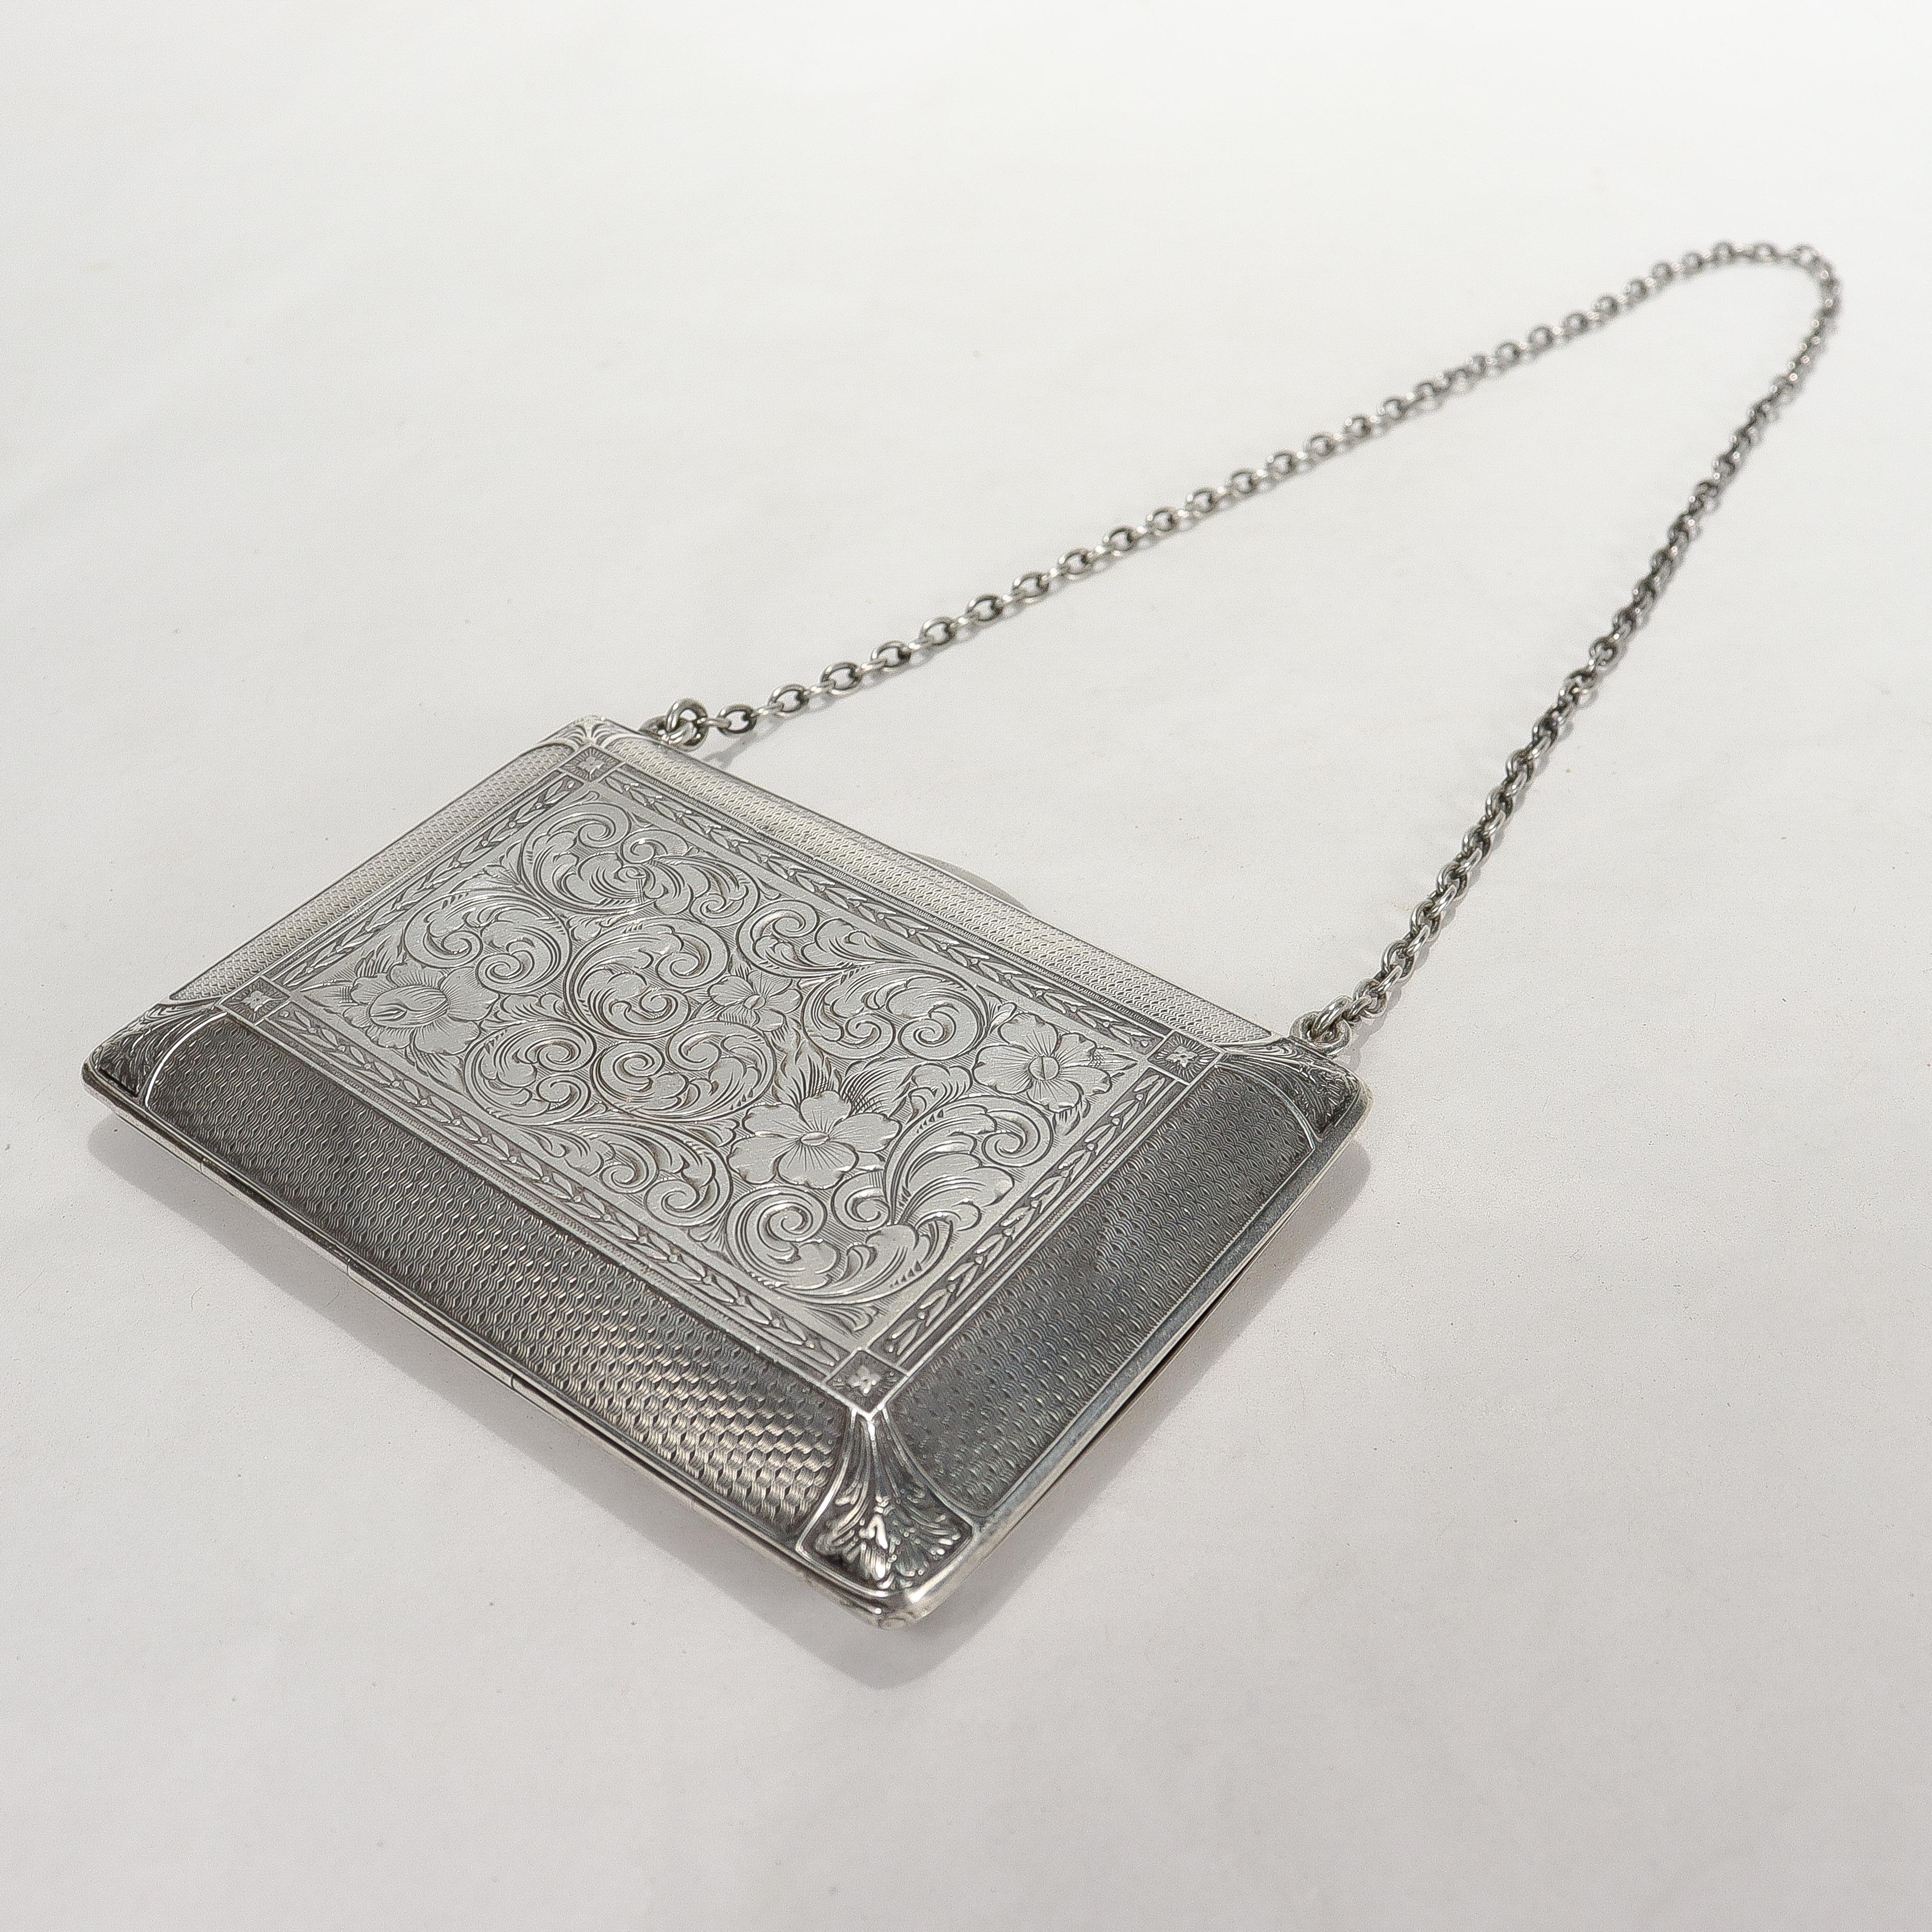 Antique Edwardian William B Kerr Sterling Silver Purse or Lady's Evening Bag For Sale 1